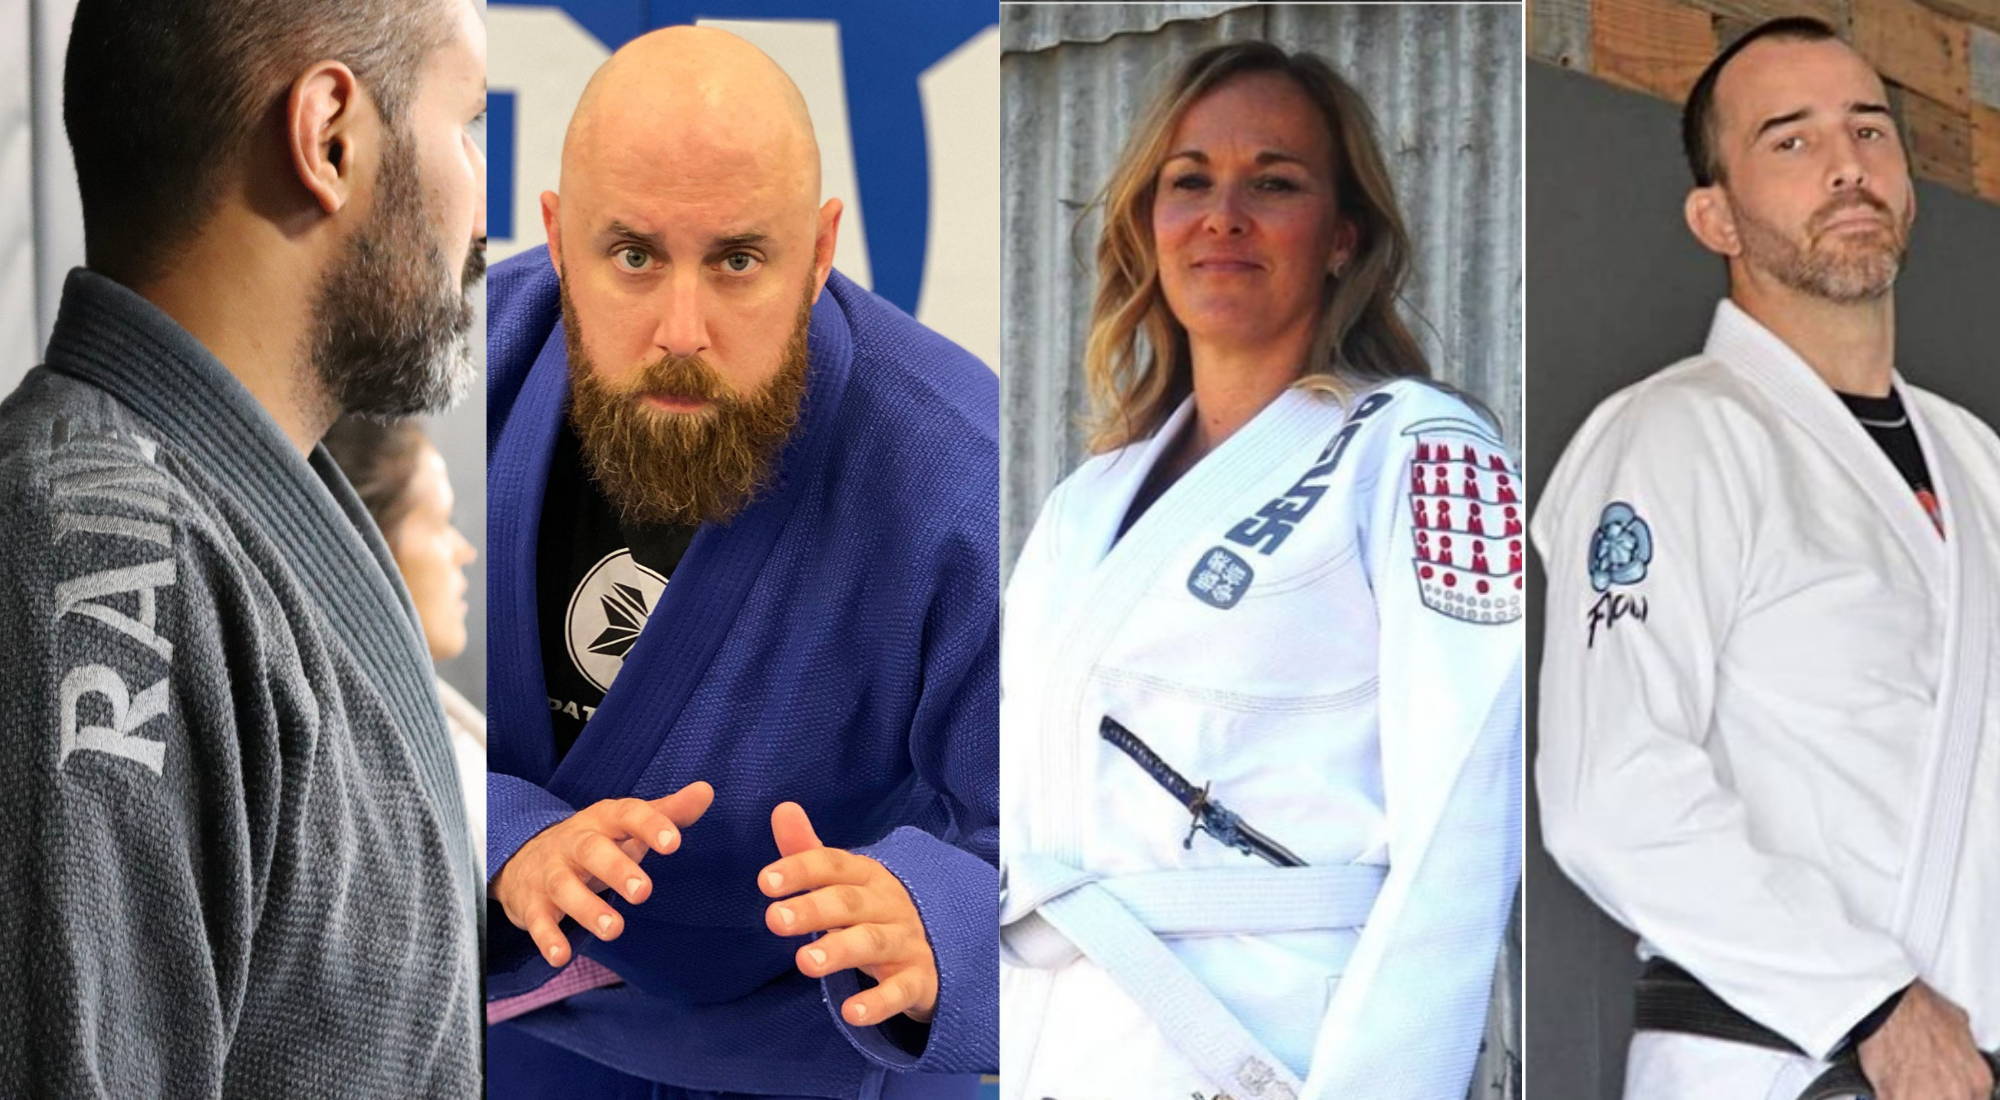 Left to right, four different BJJ grapplers standing in various hemp gis.